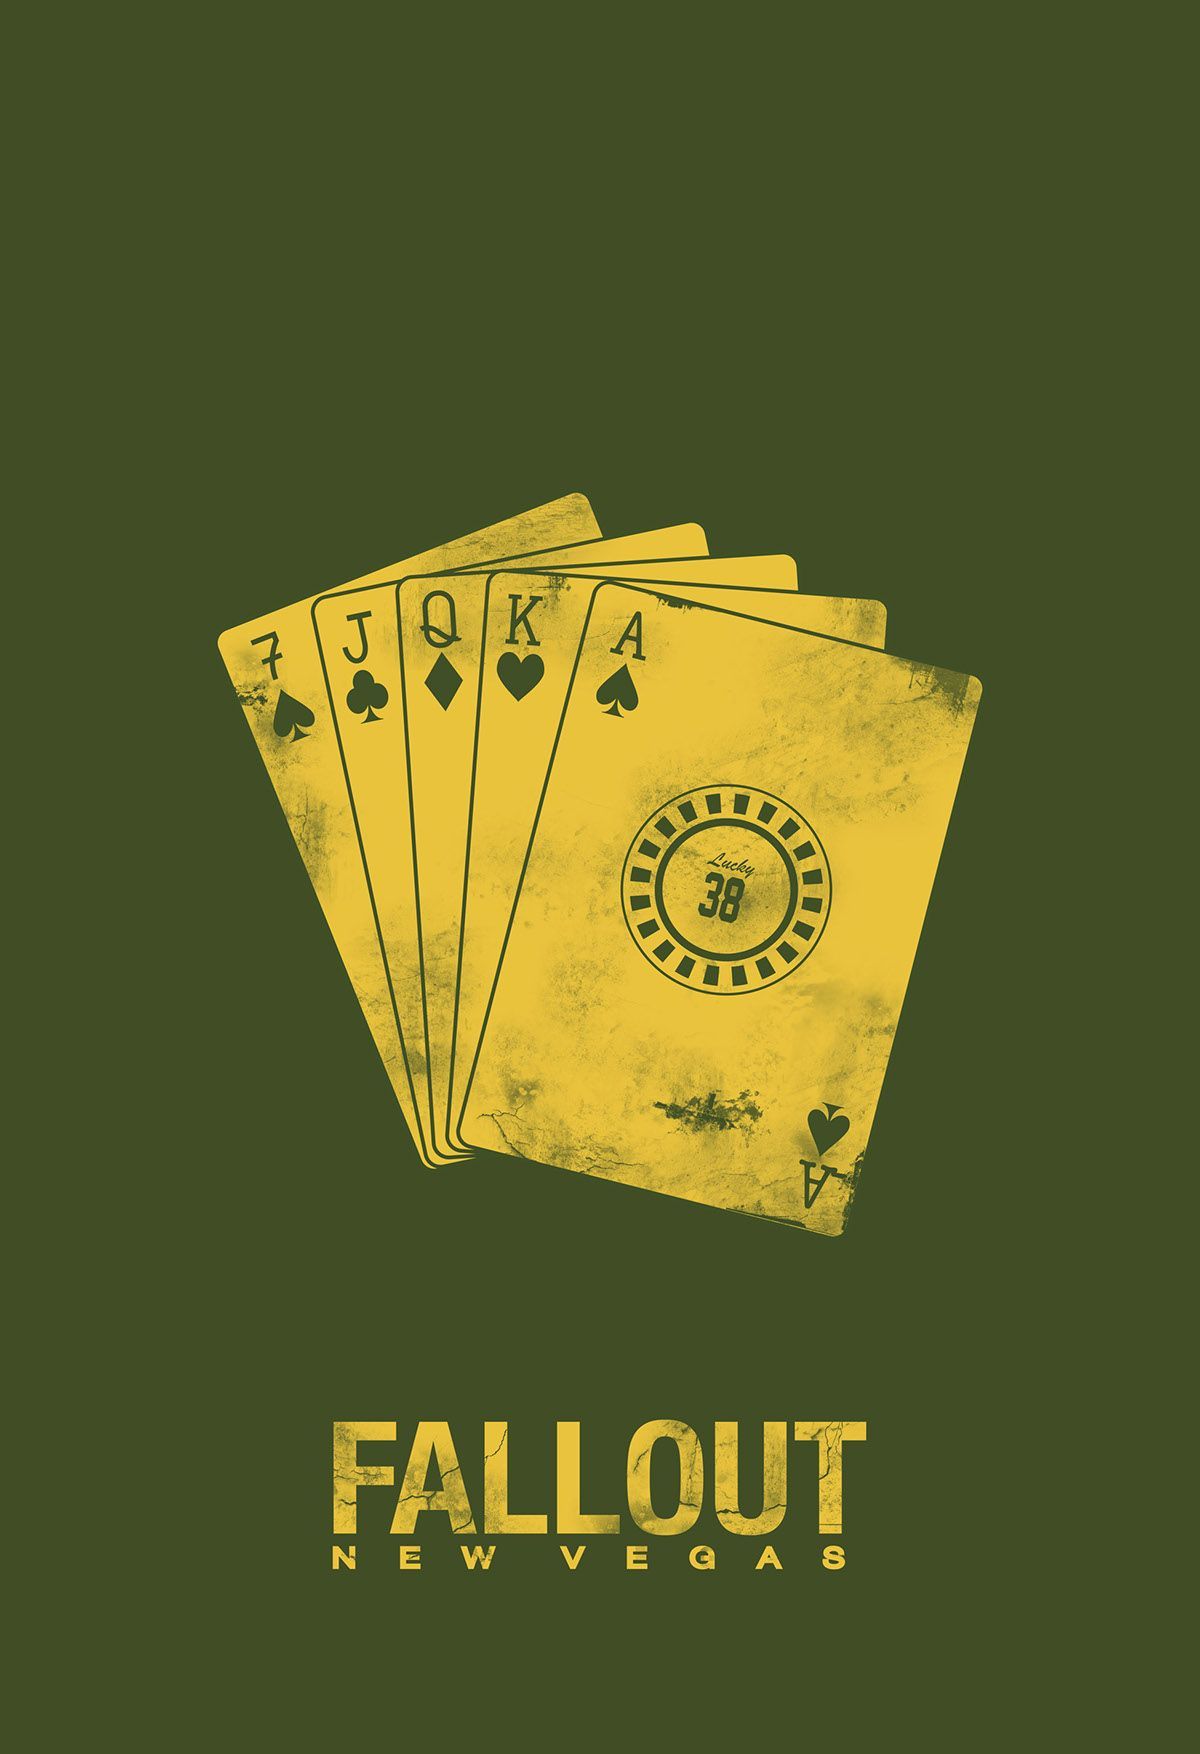 Android fallout phone HD wallpapers  Pxfuel